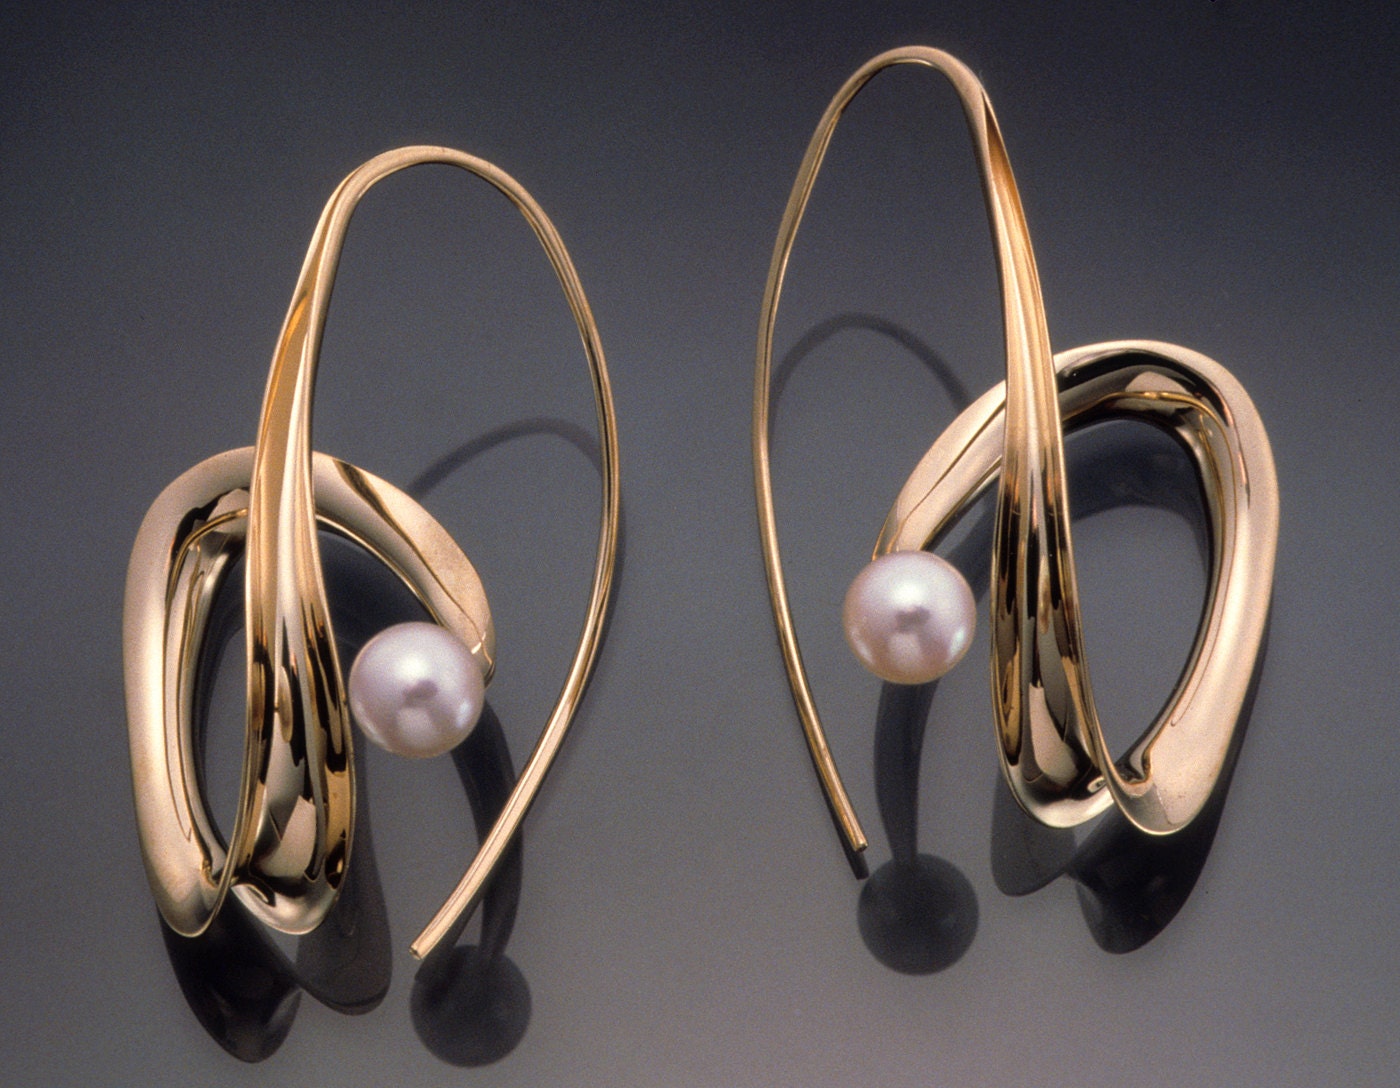 14K Shiny Solid Gold Earrings With Cultured Akoya Pearls. - Etsy